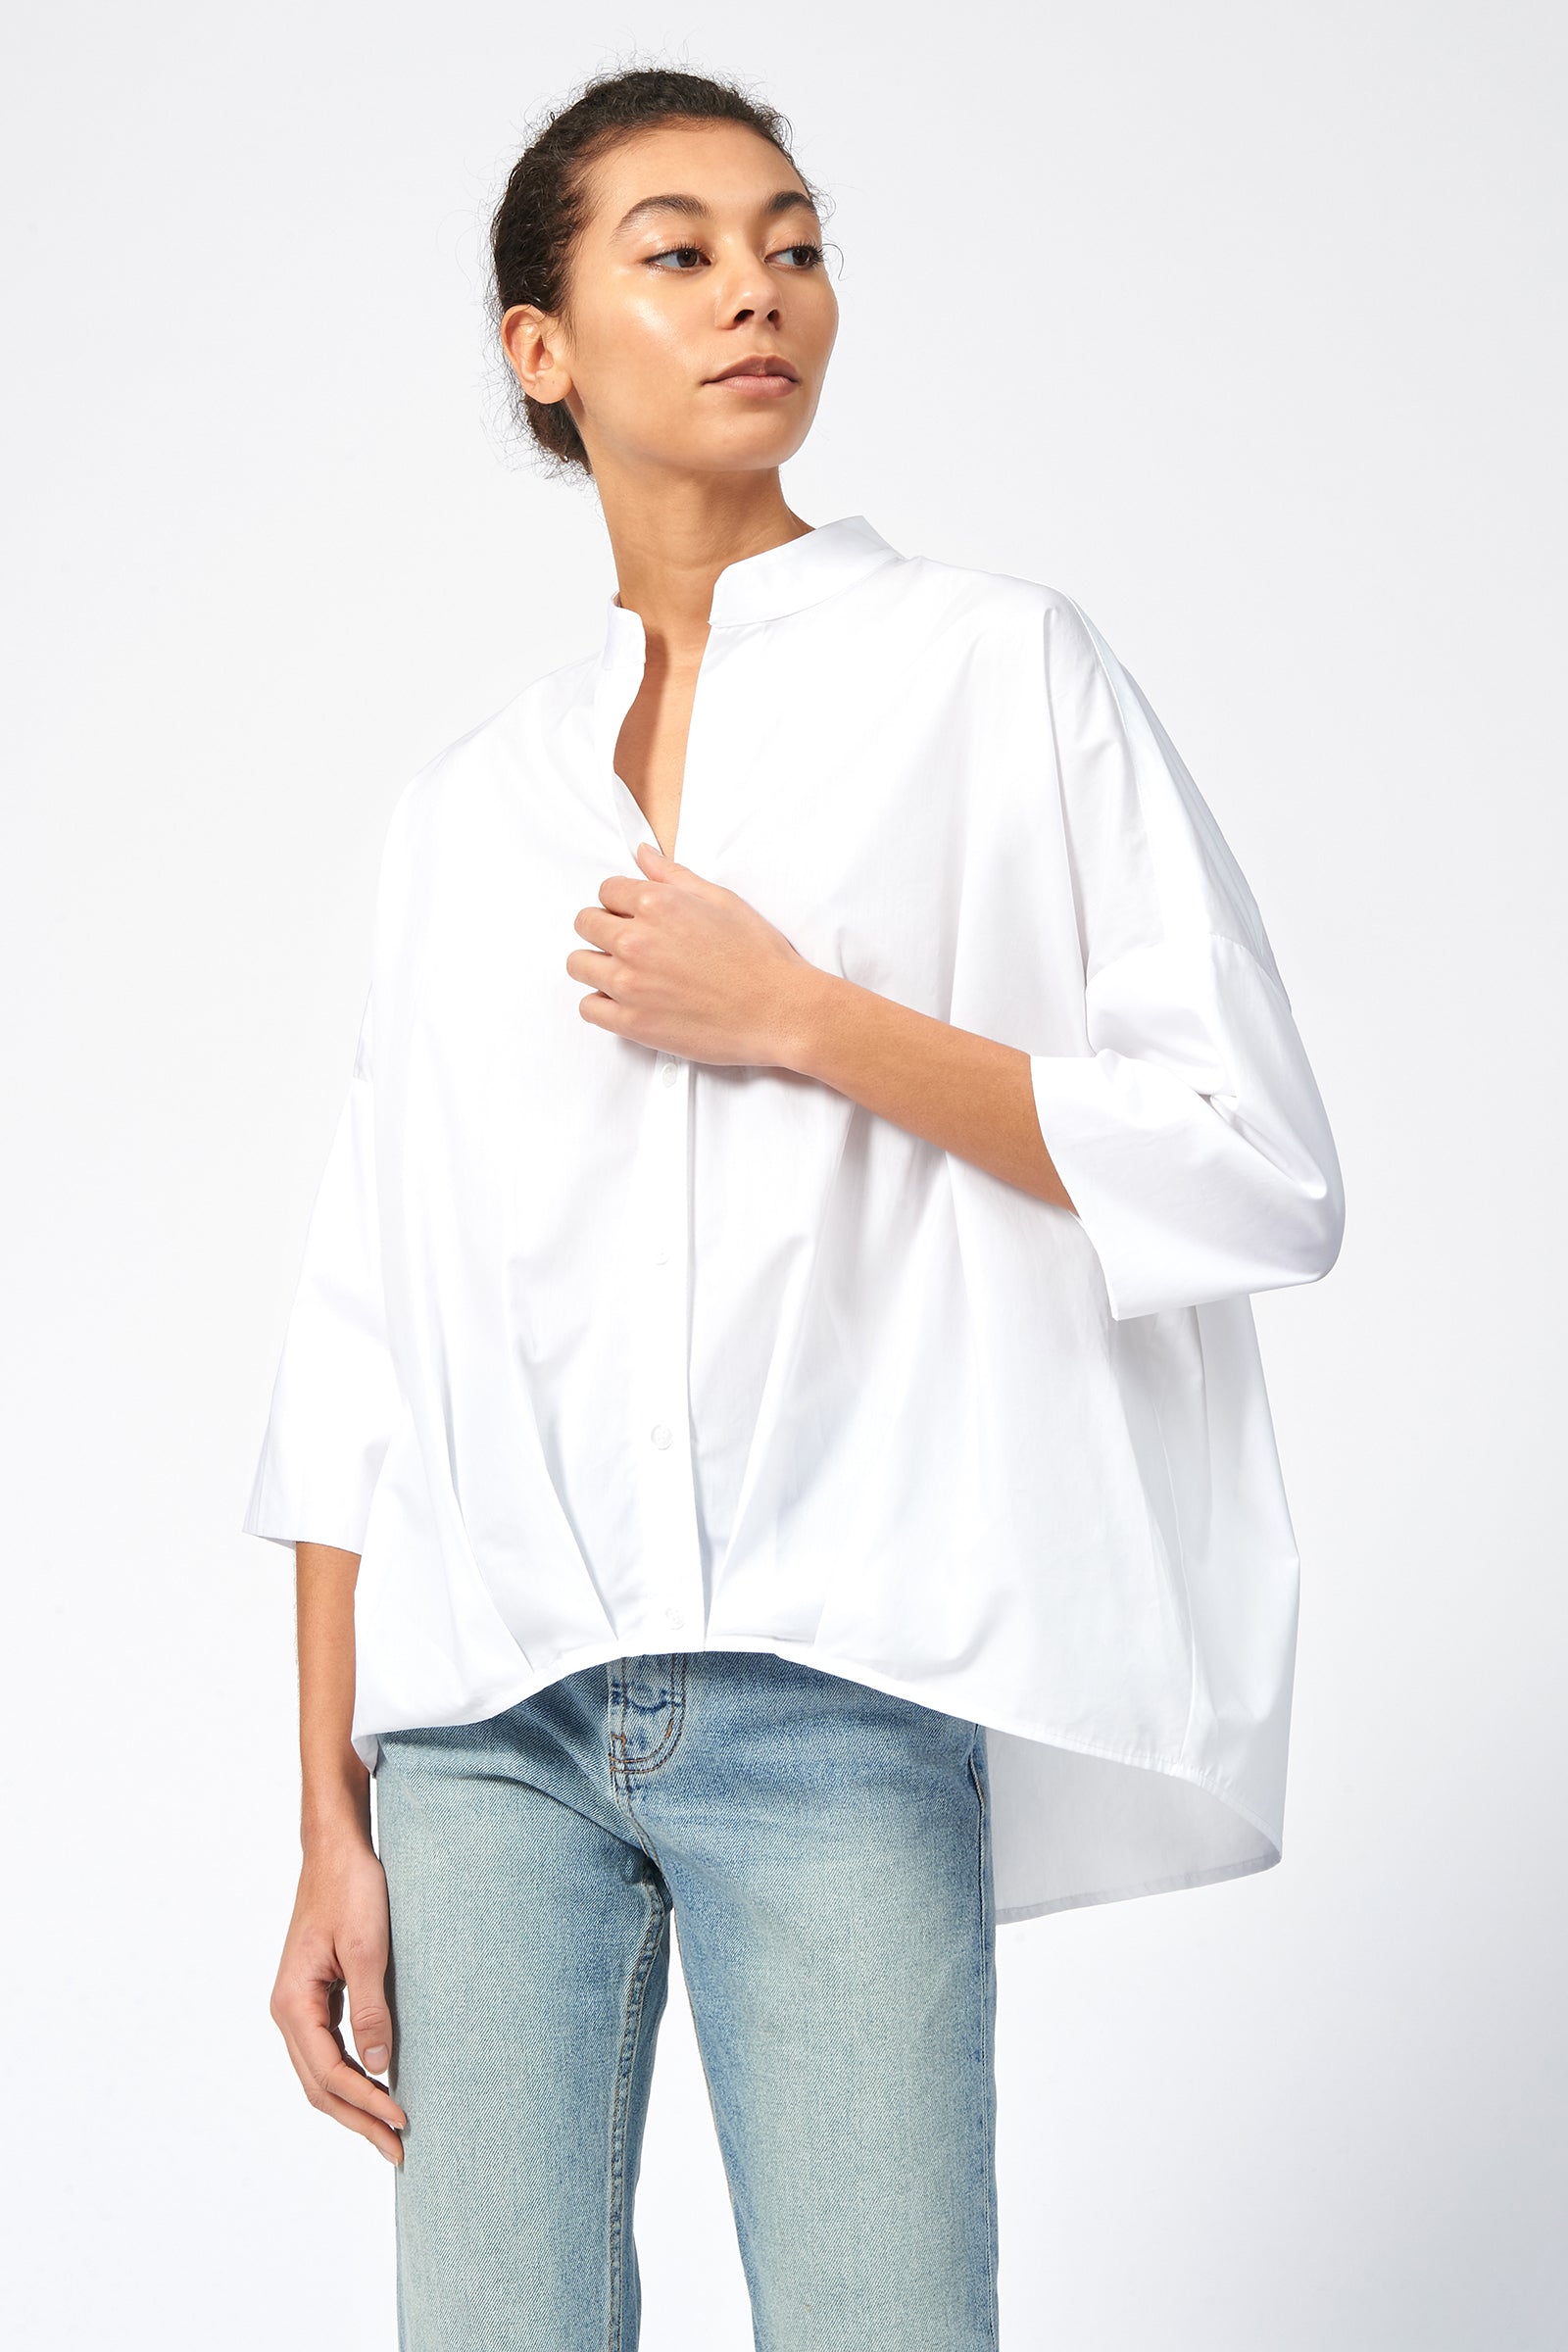 Cape Sweatshirt in White Made From Bamboo and Cotton French Terry – KAL ...